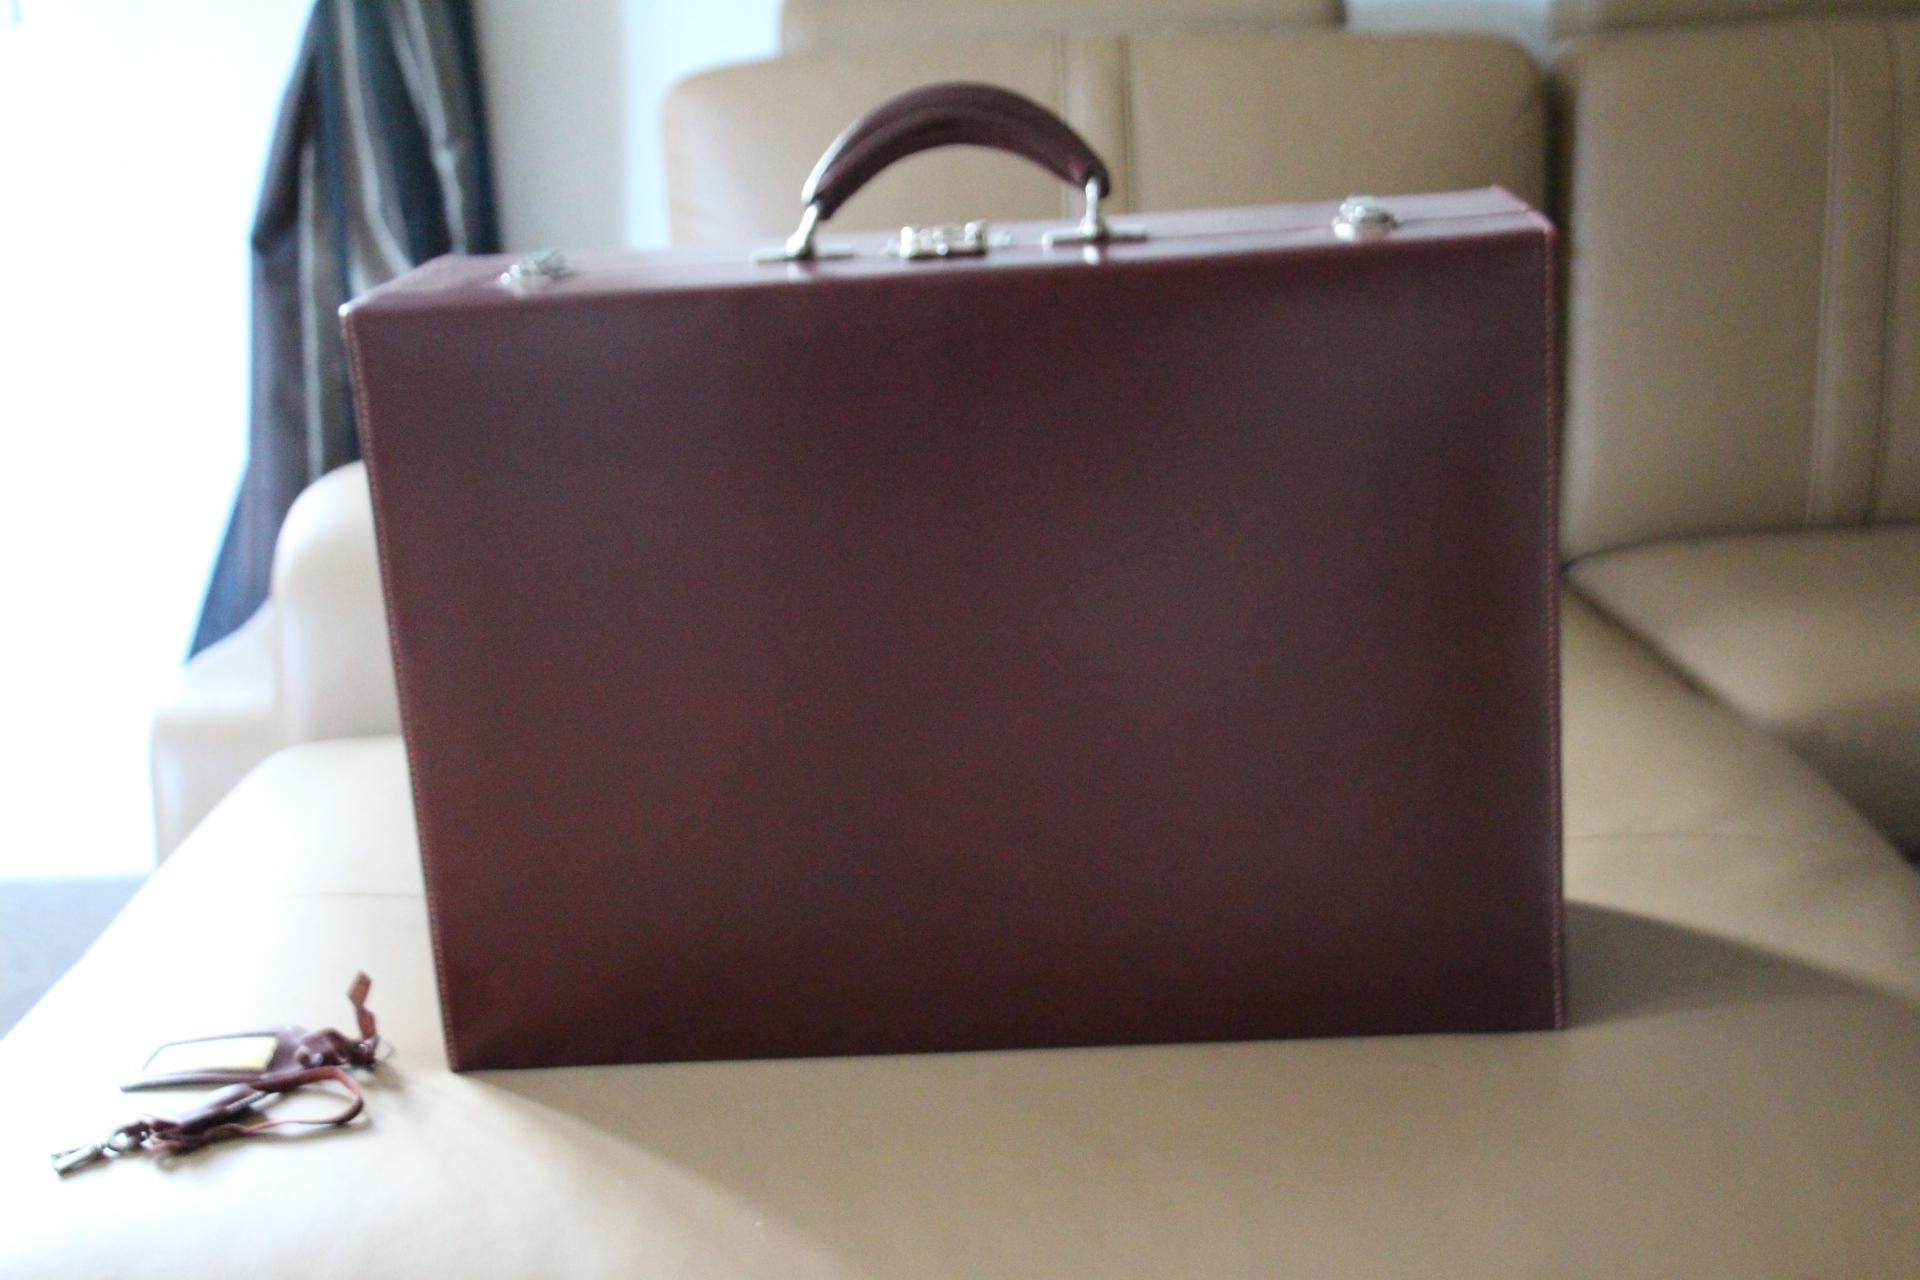 Red Leather Hermes Suitcase 53 cm, Hermes Trunk, Hermes Luggage 5